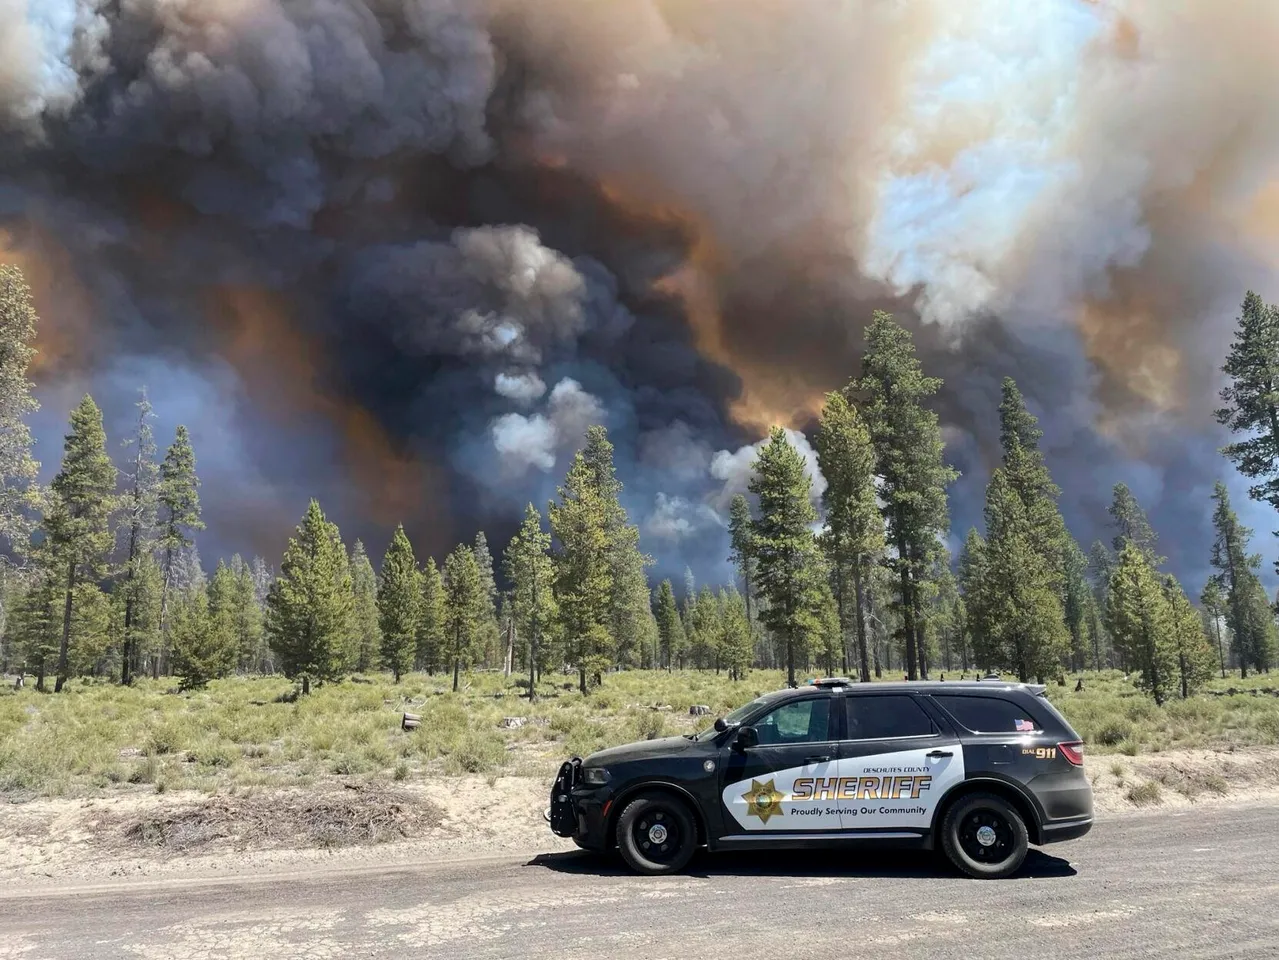 The Darlene 3 Fire near La Pine, Oregon, has rapidly grown to over 3,500 acres prompting evacuation. 